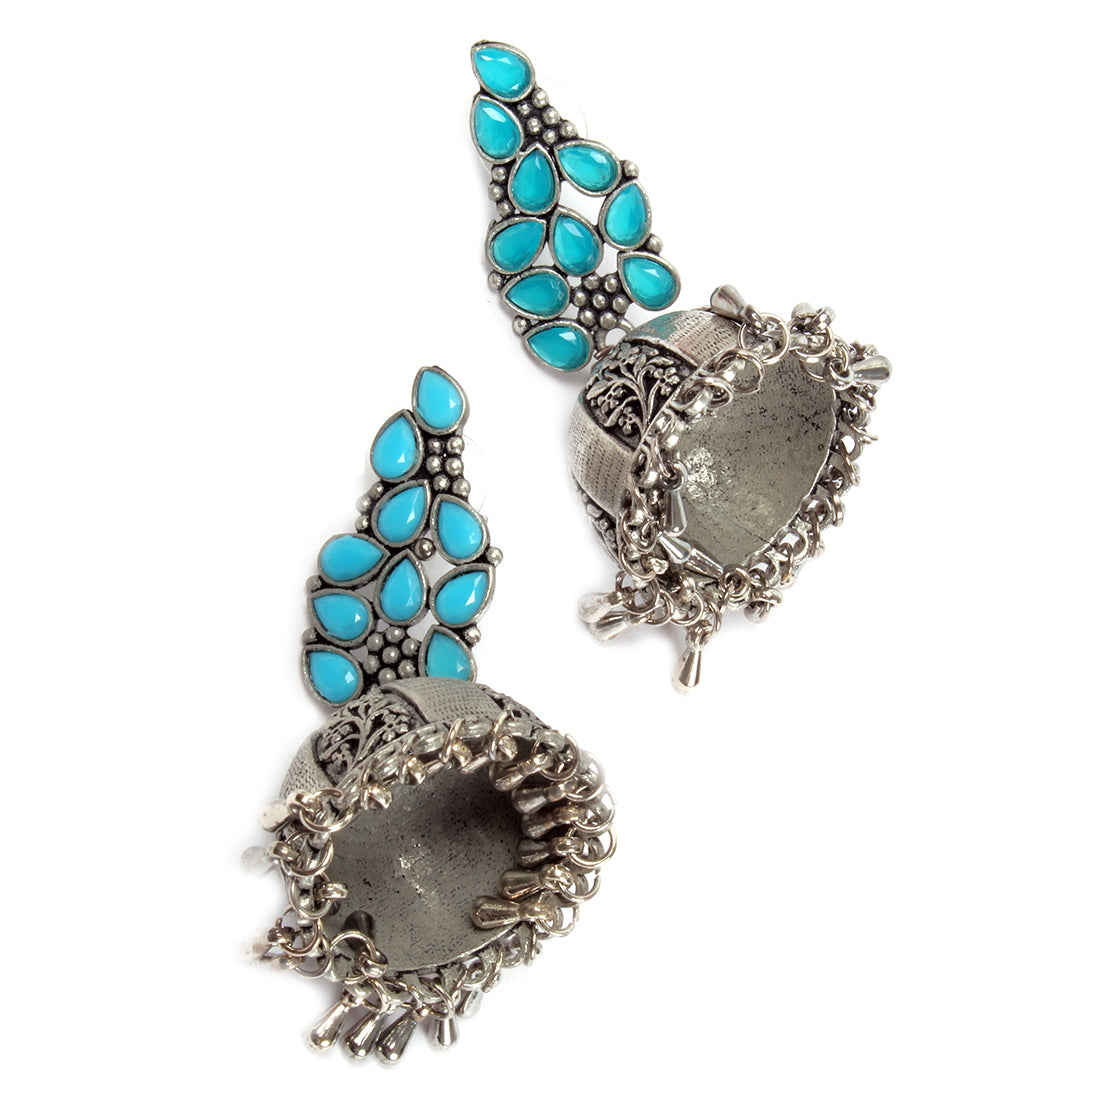 OVERSIZED HANDCRAFTED ETHNIC SILVER-TONED WITH BLUE RHINESTONES GHUNGROO JHUMKA EARRINGS